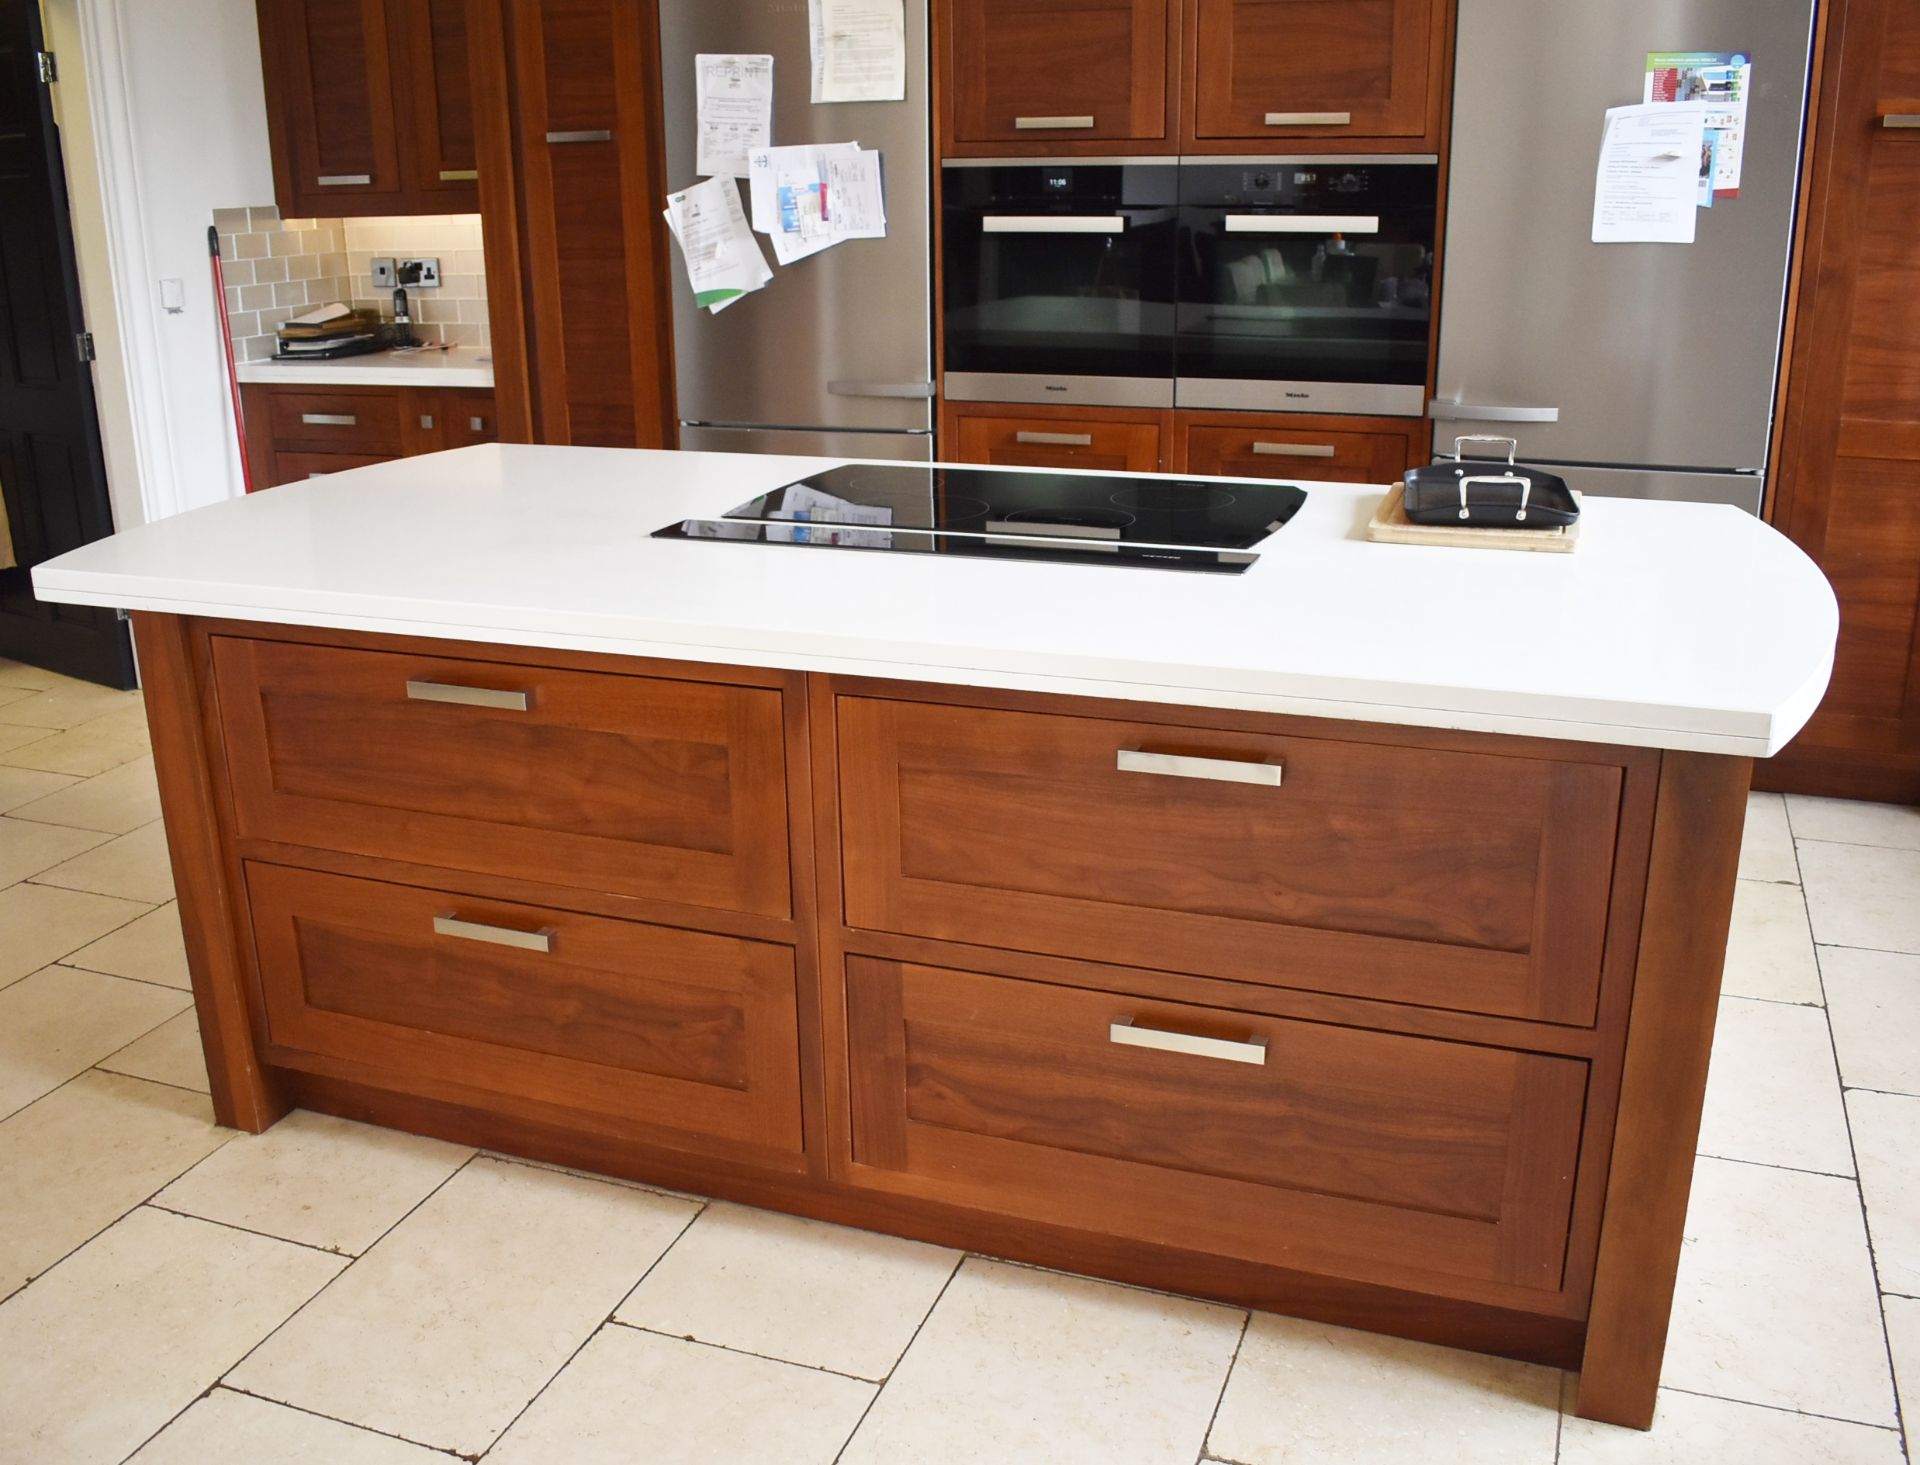 1 x Bespoke Contemporary Fitted Kitchen With Appliances - Features Solid Walnut Doors - NO VAT! - Image 32 of 114